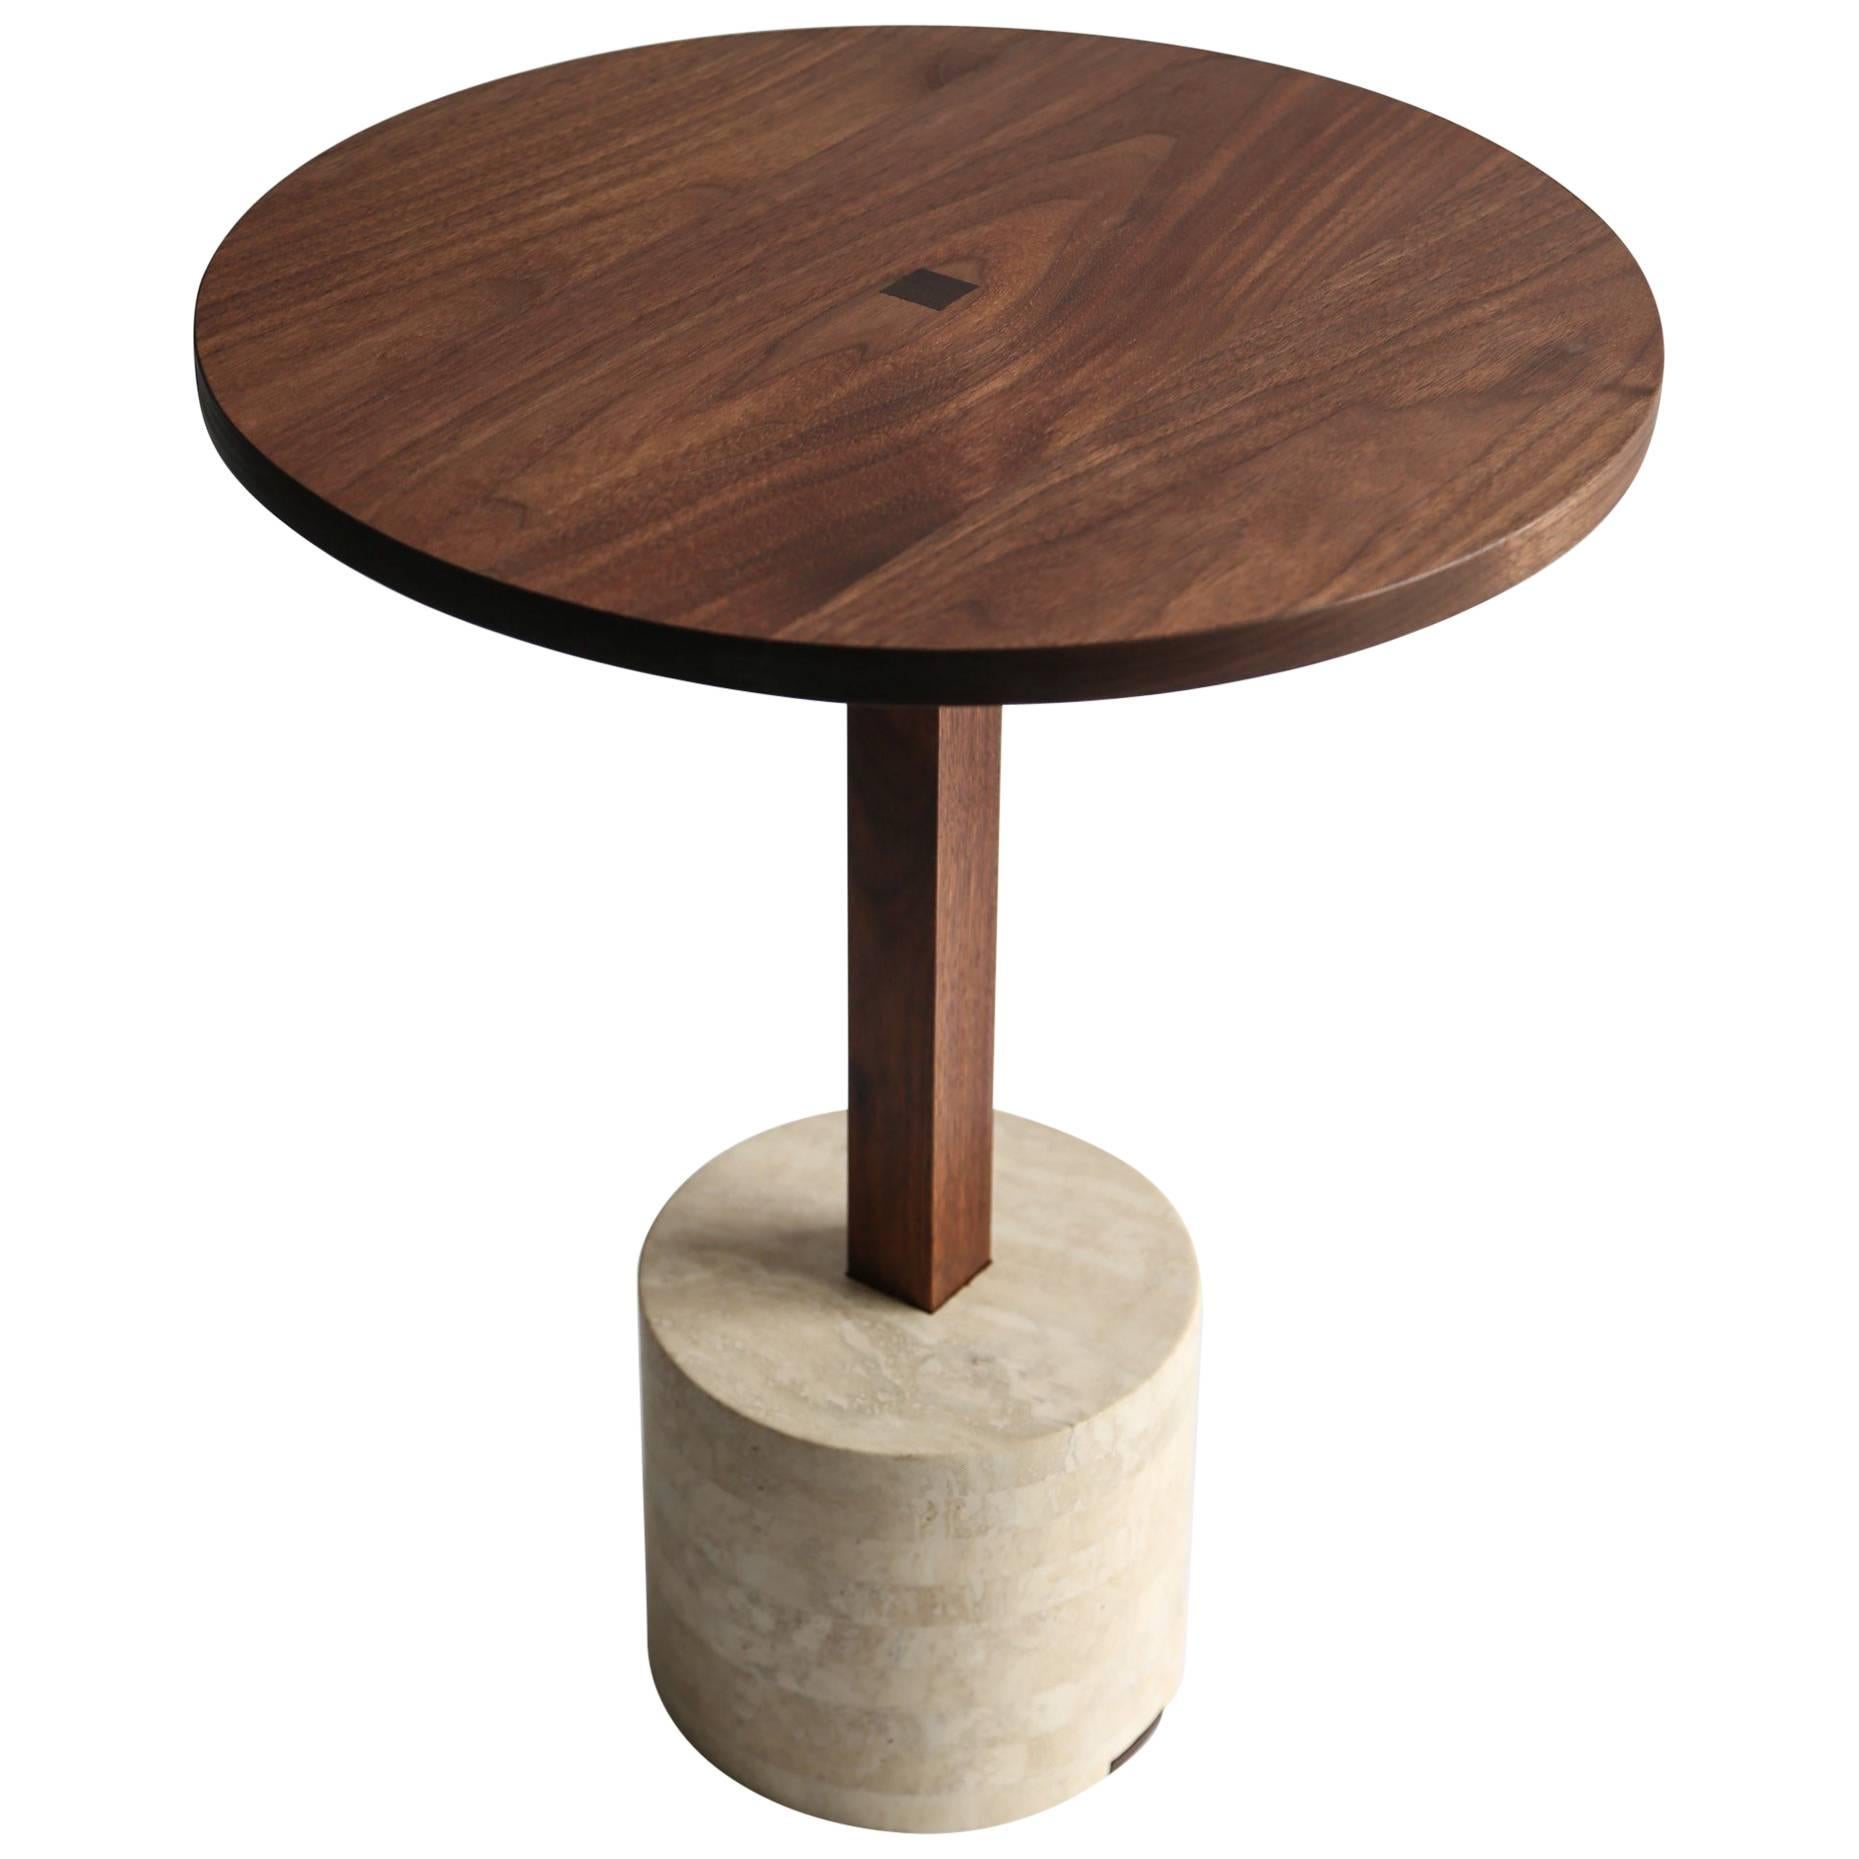 Contemporary Foundation Side Table in Walnut Wood and Stone by Fort Standard